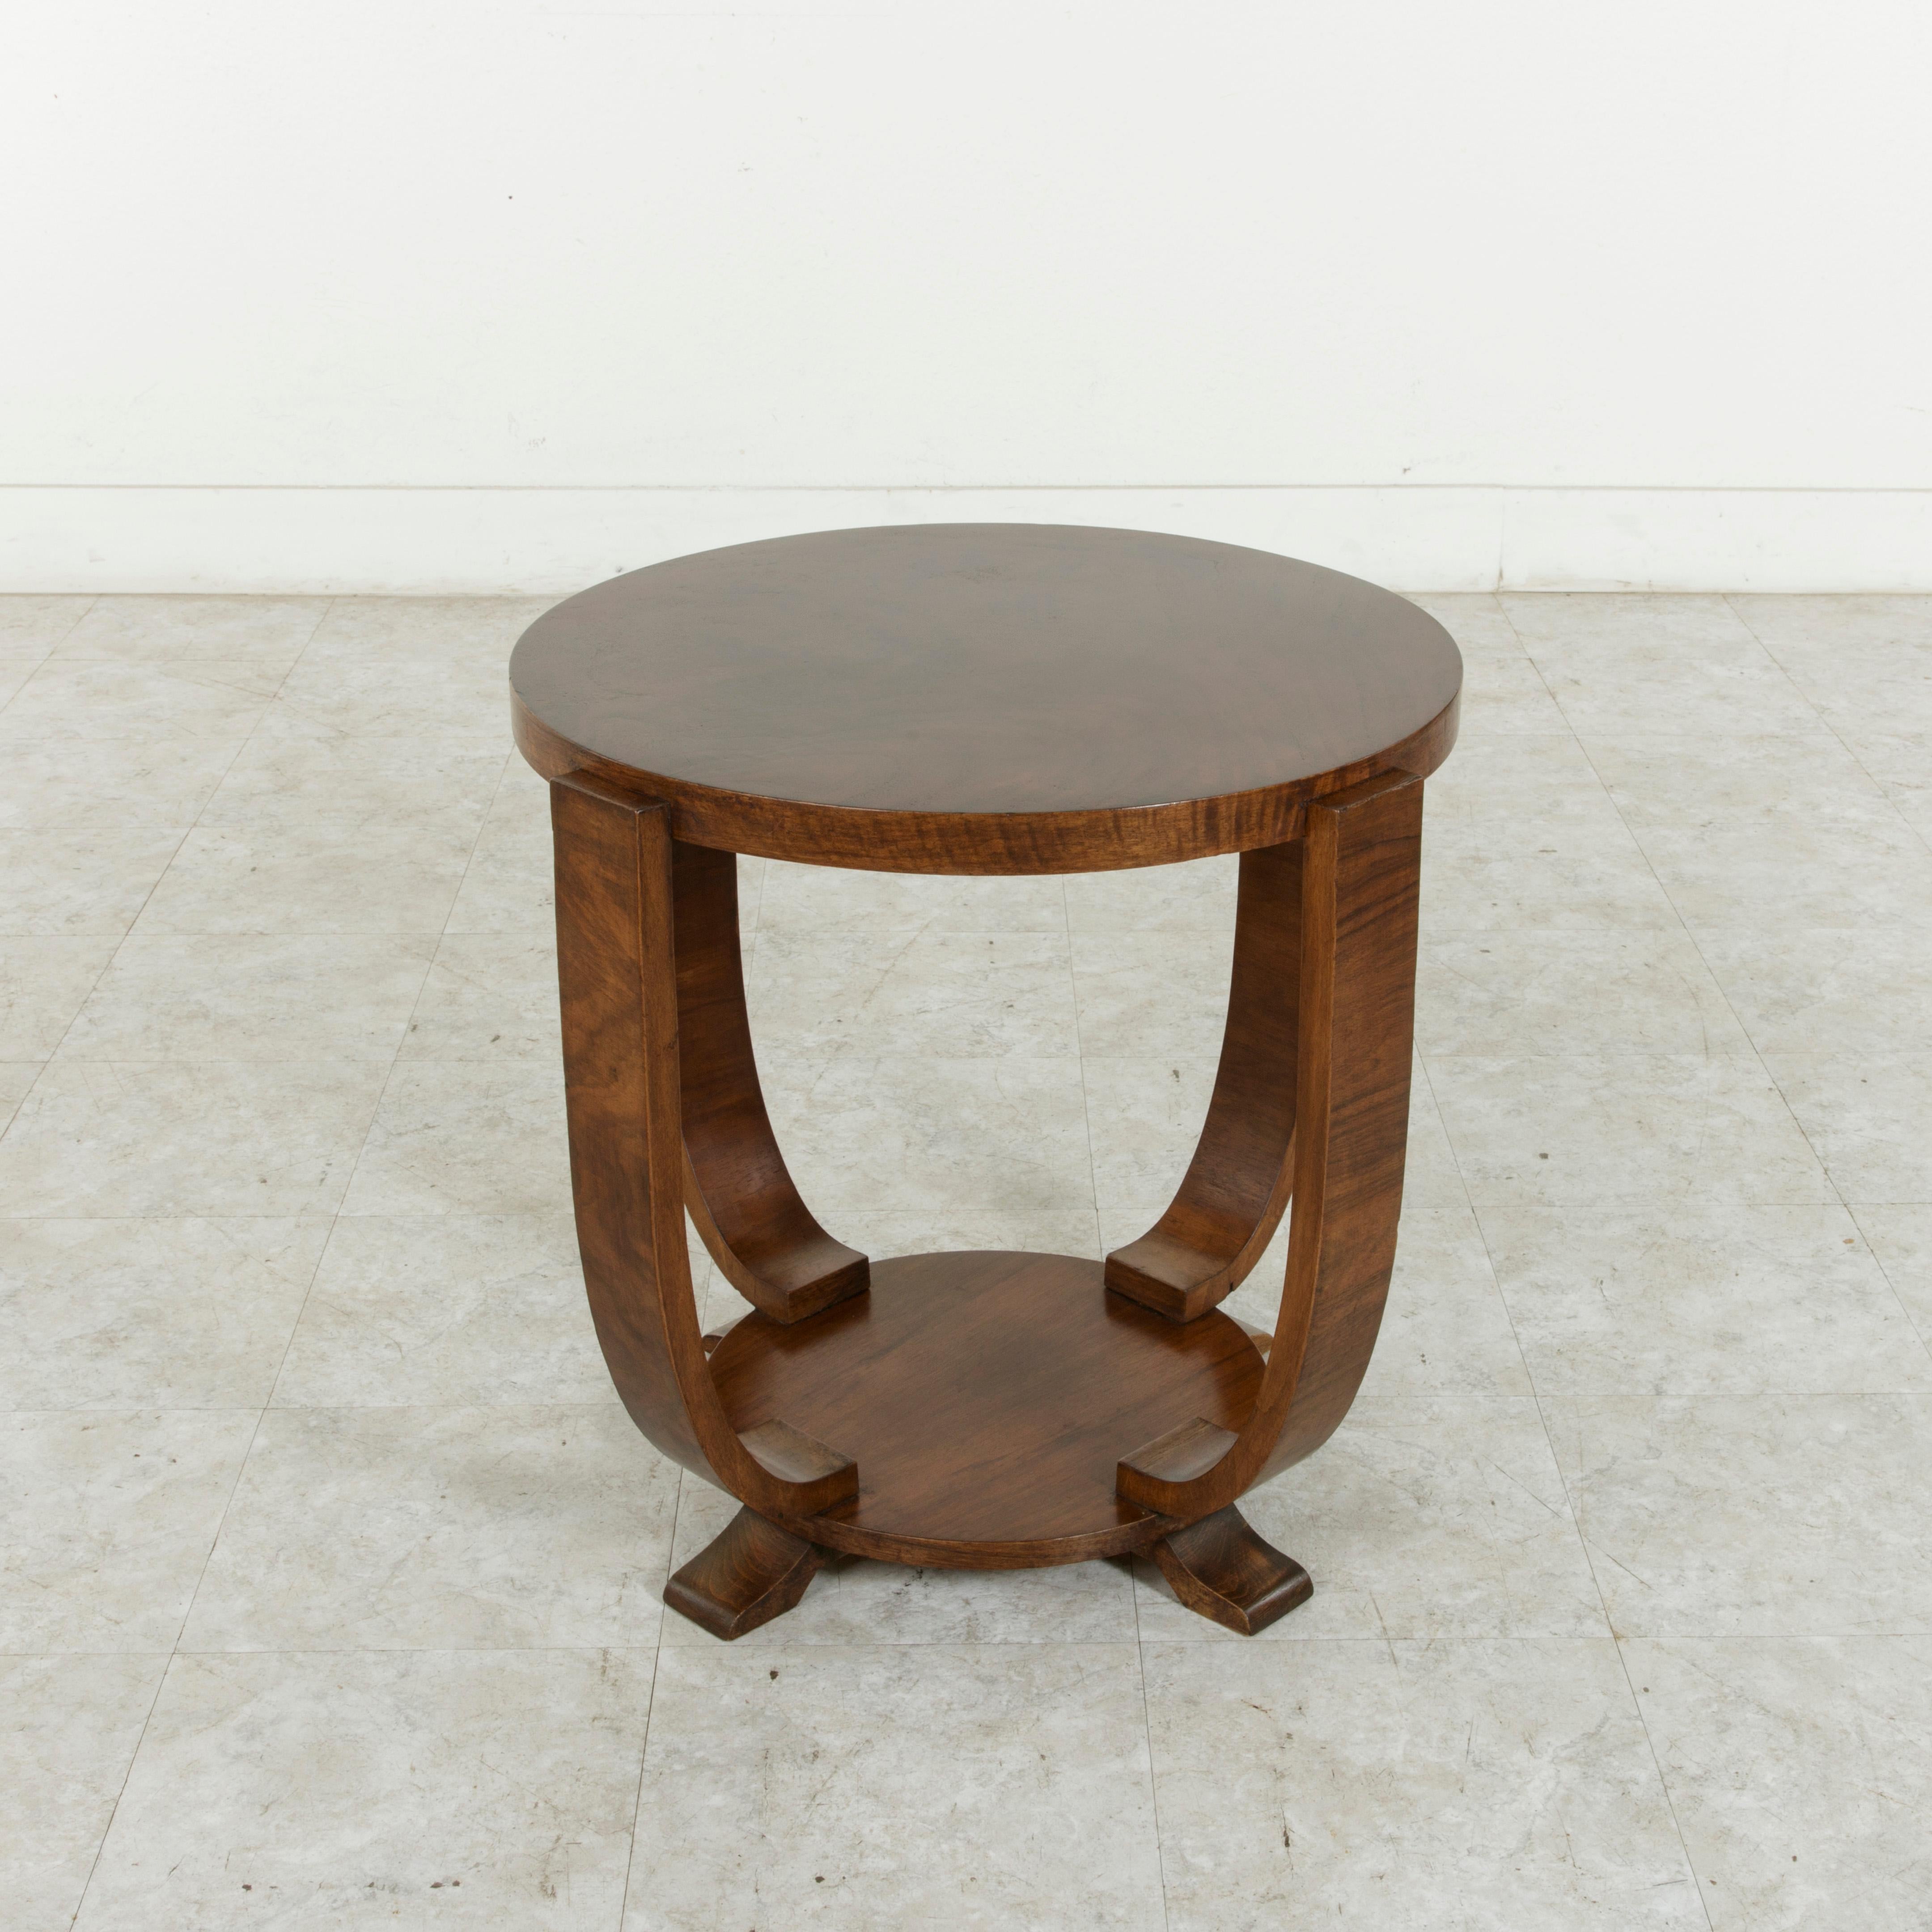 This early 20th century French Art Deco period side table boasts a solid walnut top supported by four curved legs that rest on a solid walnut base. A fine example of Classic French Art Deco, this table was found in the Languedoc region of Southern